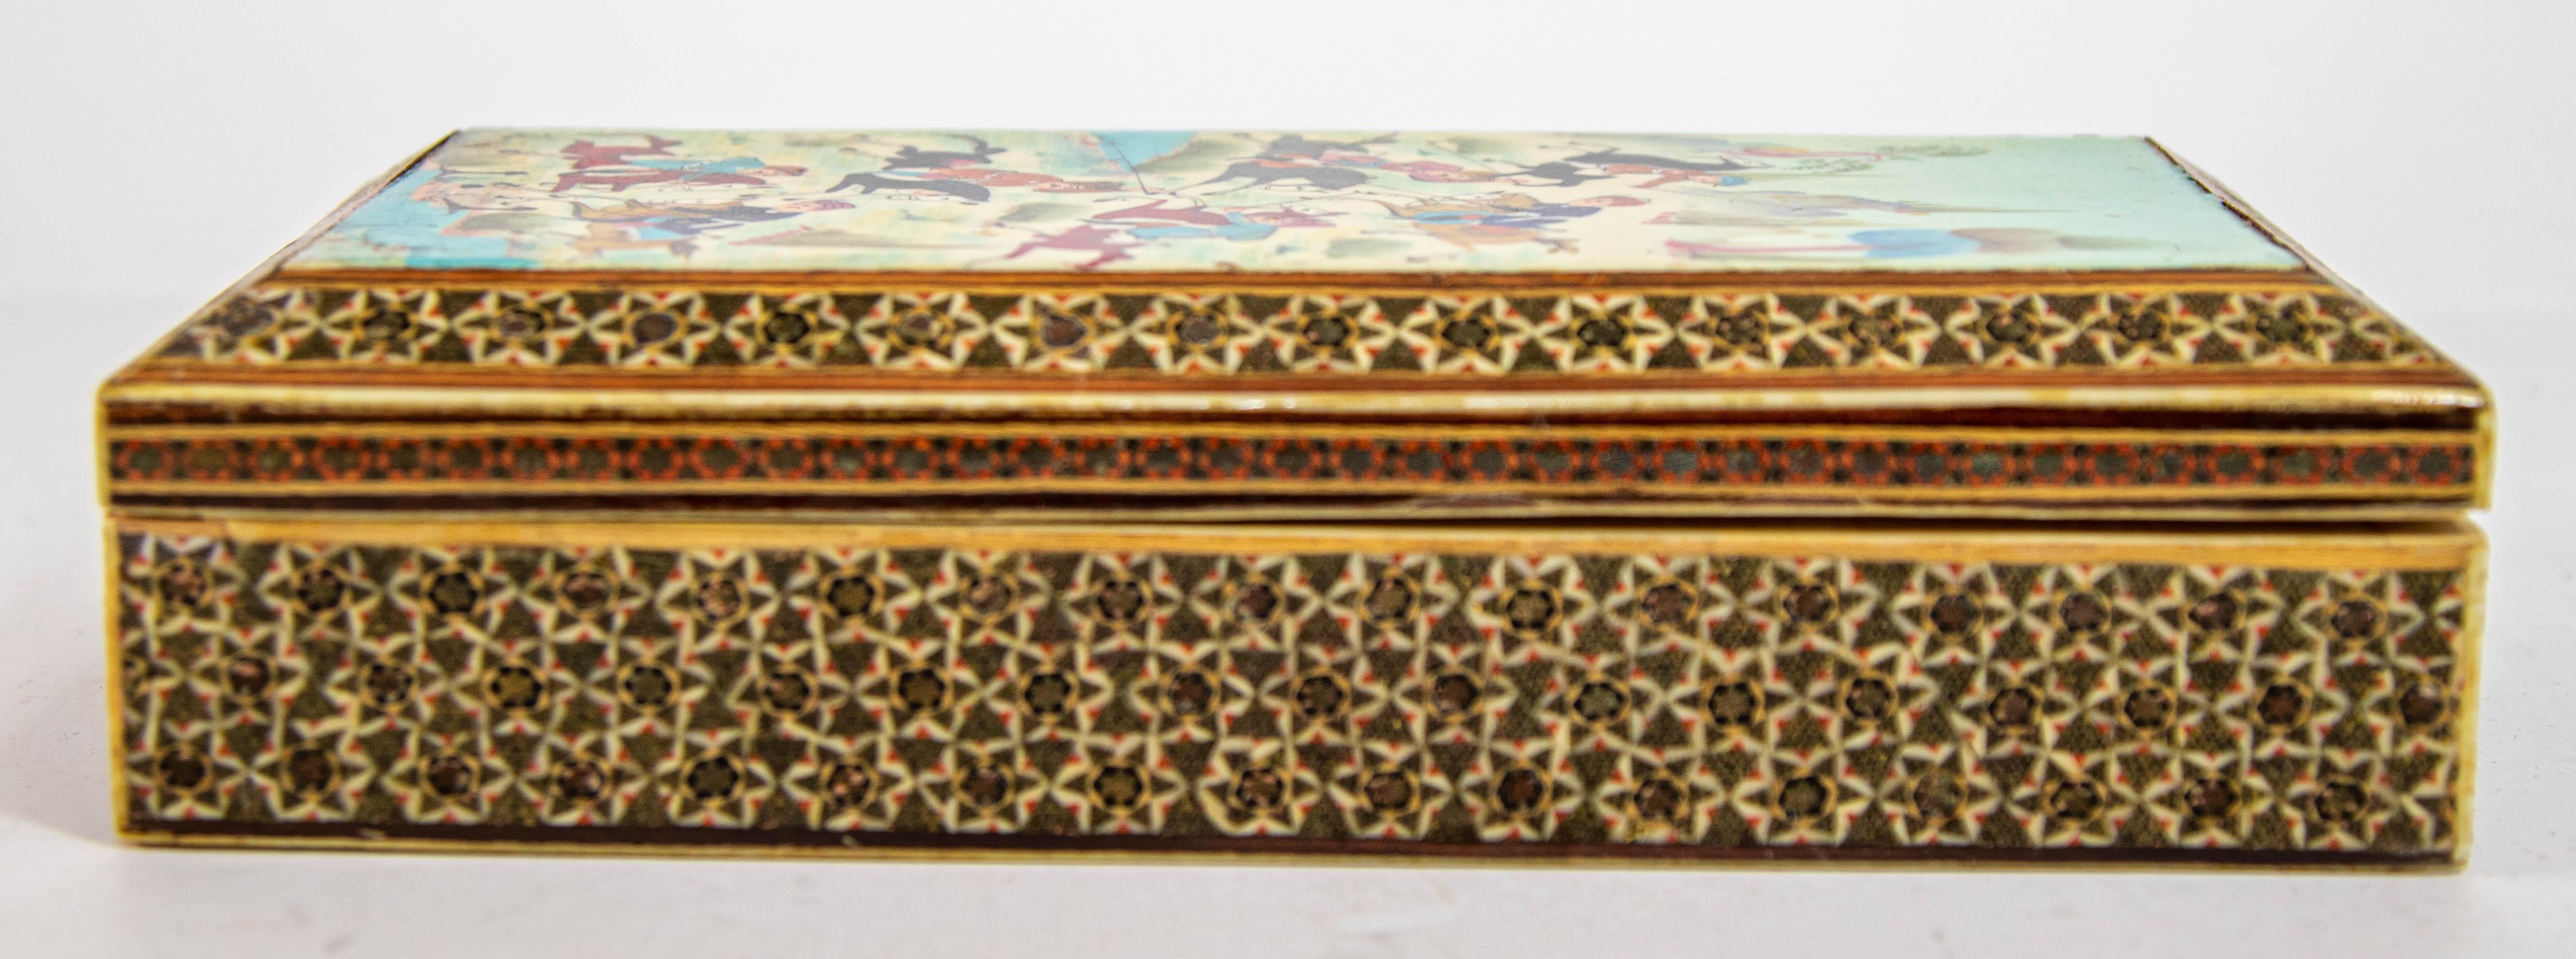 Fine Antique Micro Mosaic Indo Persian Moorish Inlaid Trinket Box In Good Condition For Sale In North Hollywood, CA